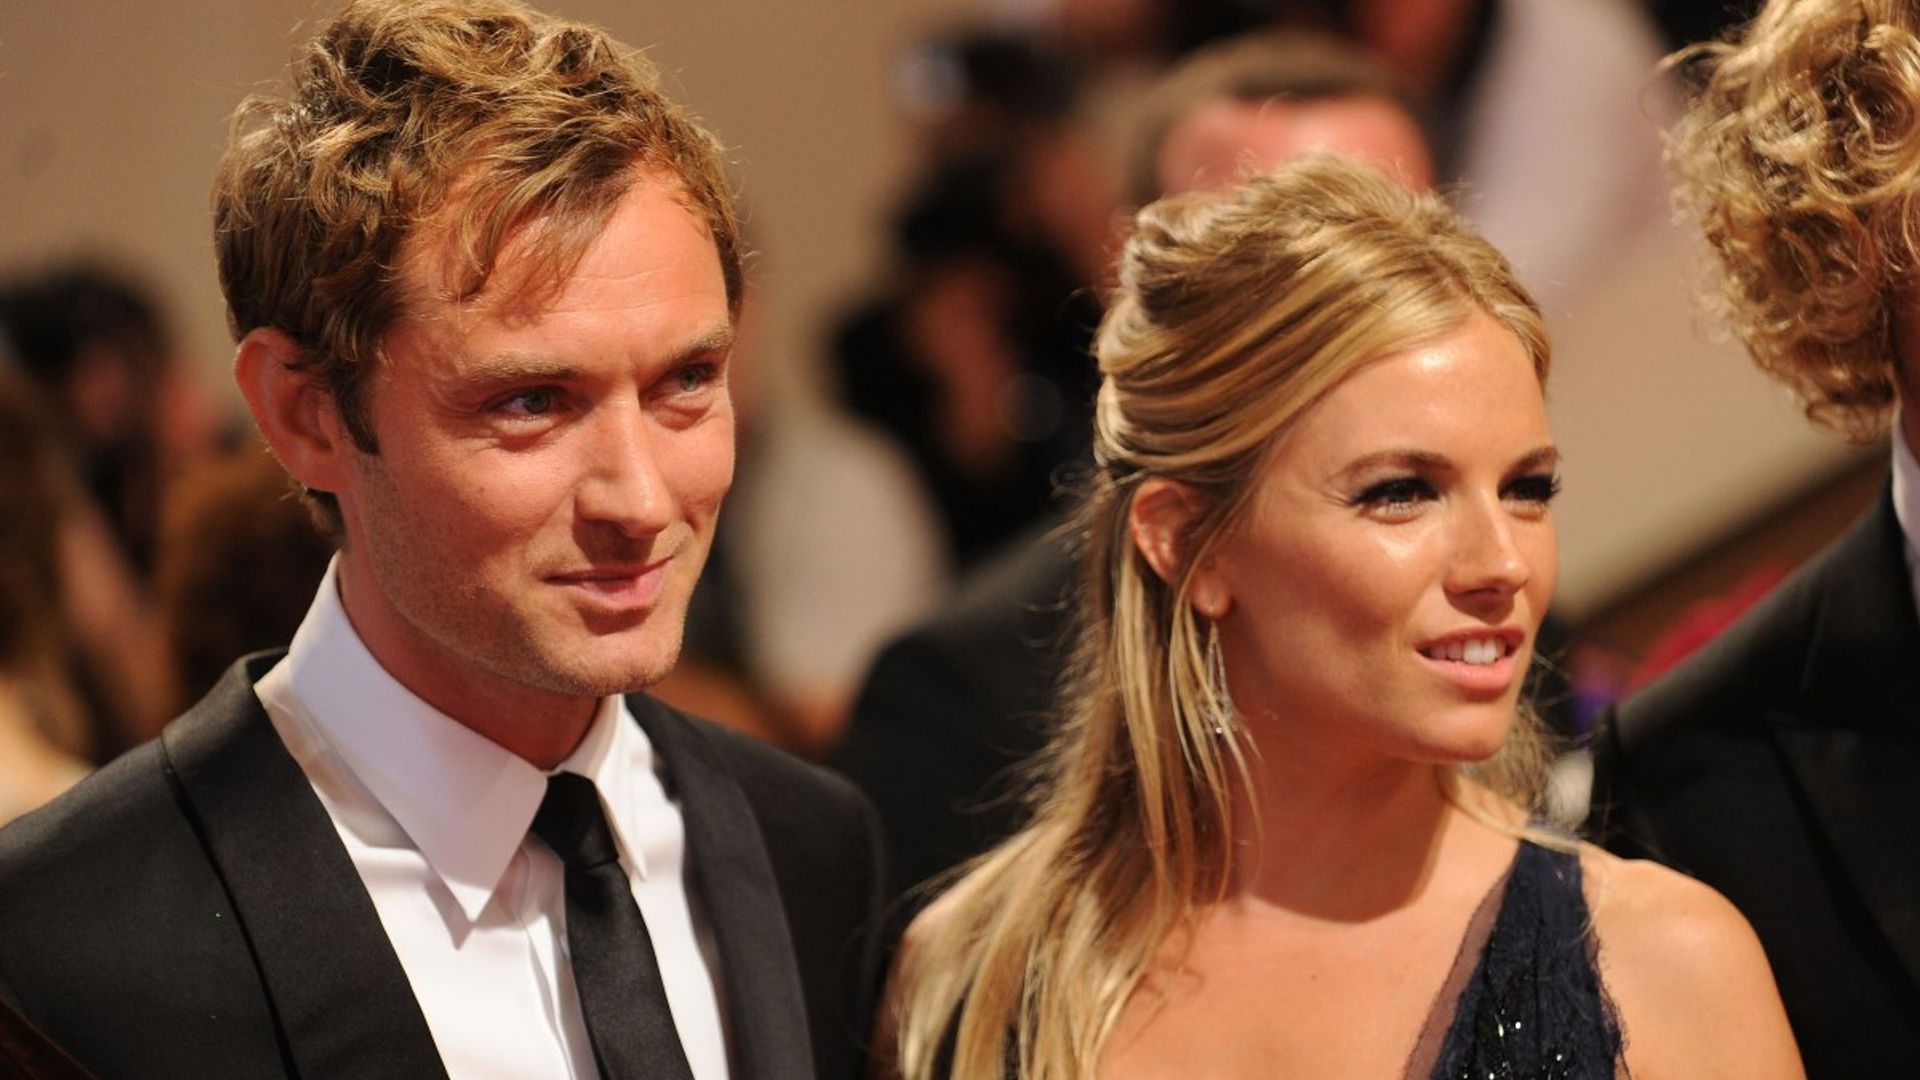 The Nest star Jude Law's relationship timeline with ex Sienna Miller